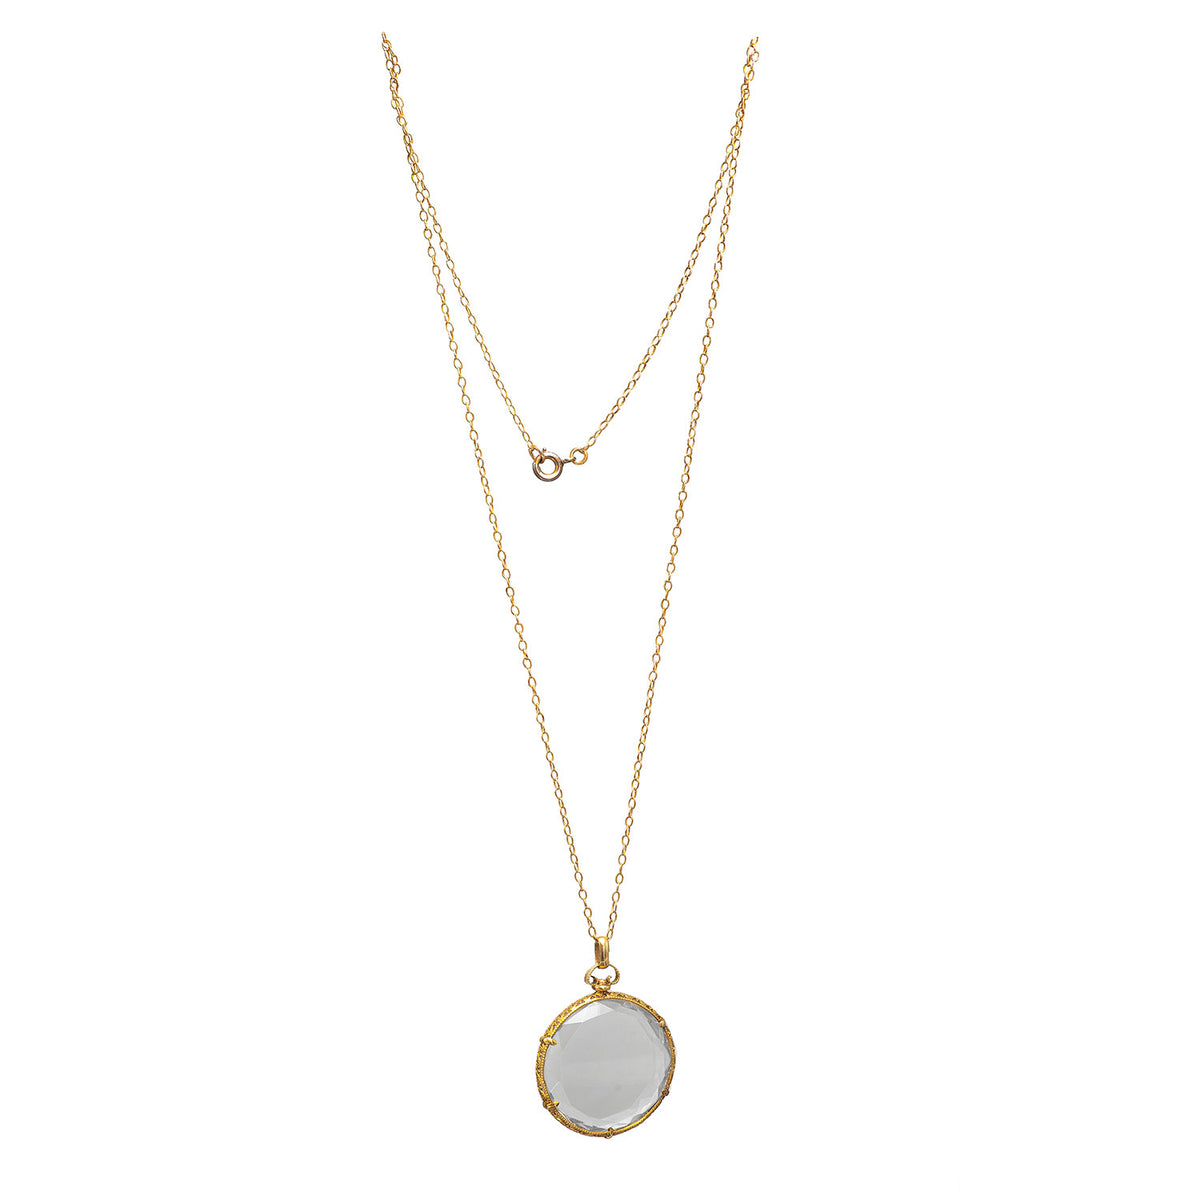 A French Rock Crystal Gold Pendant